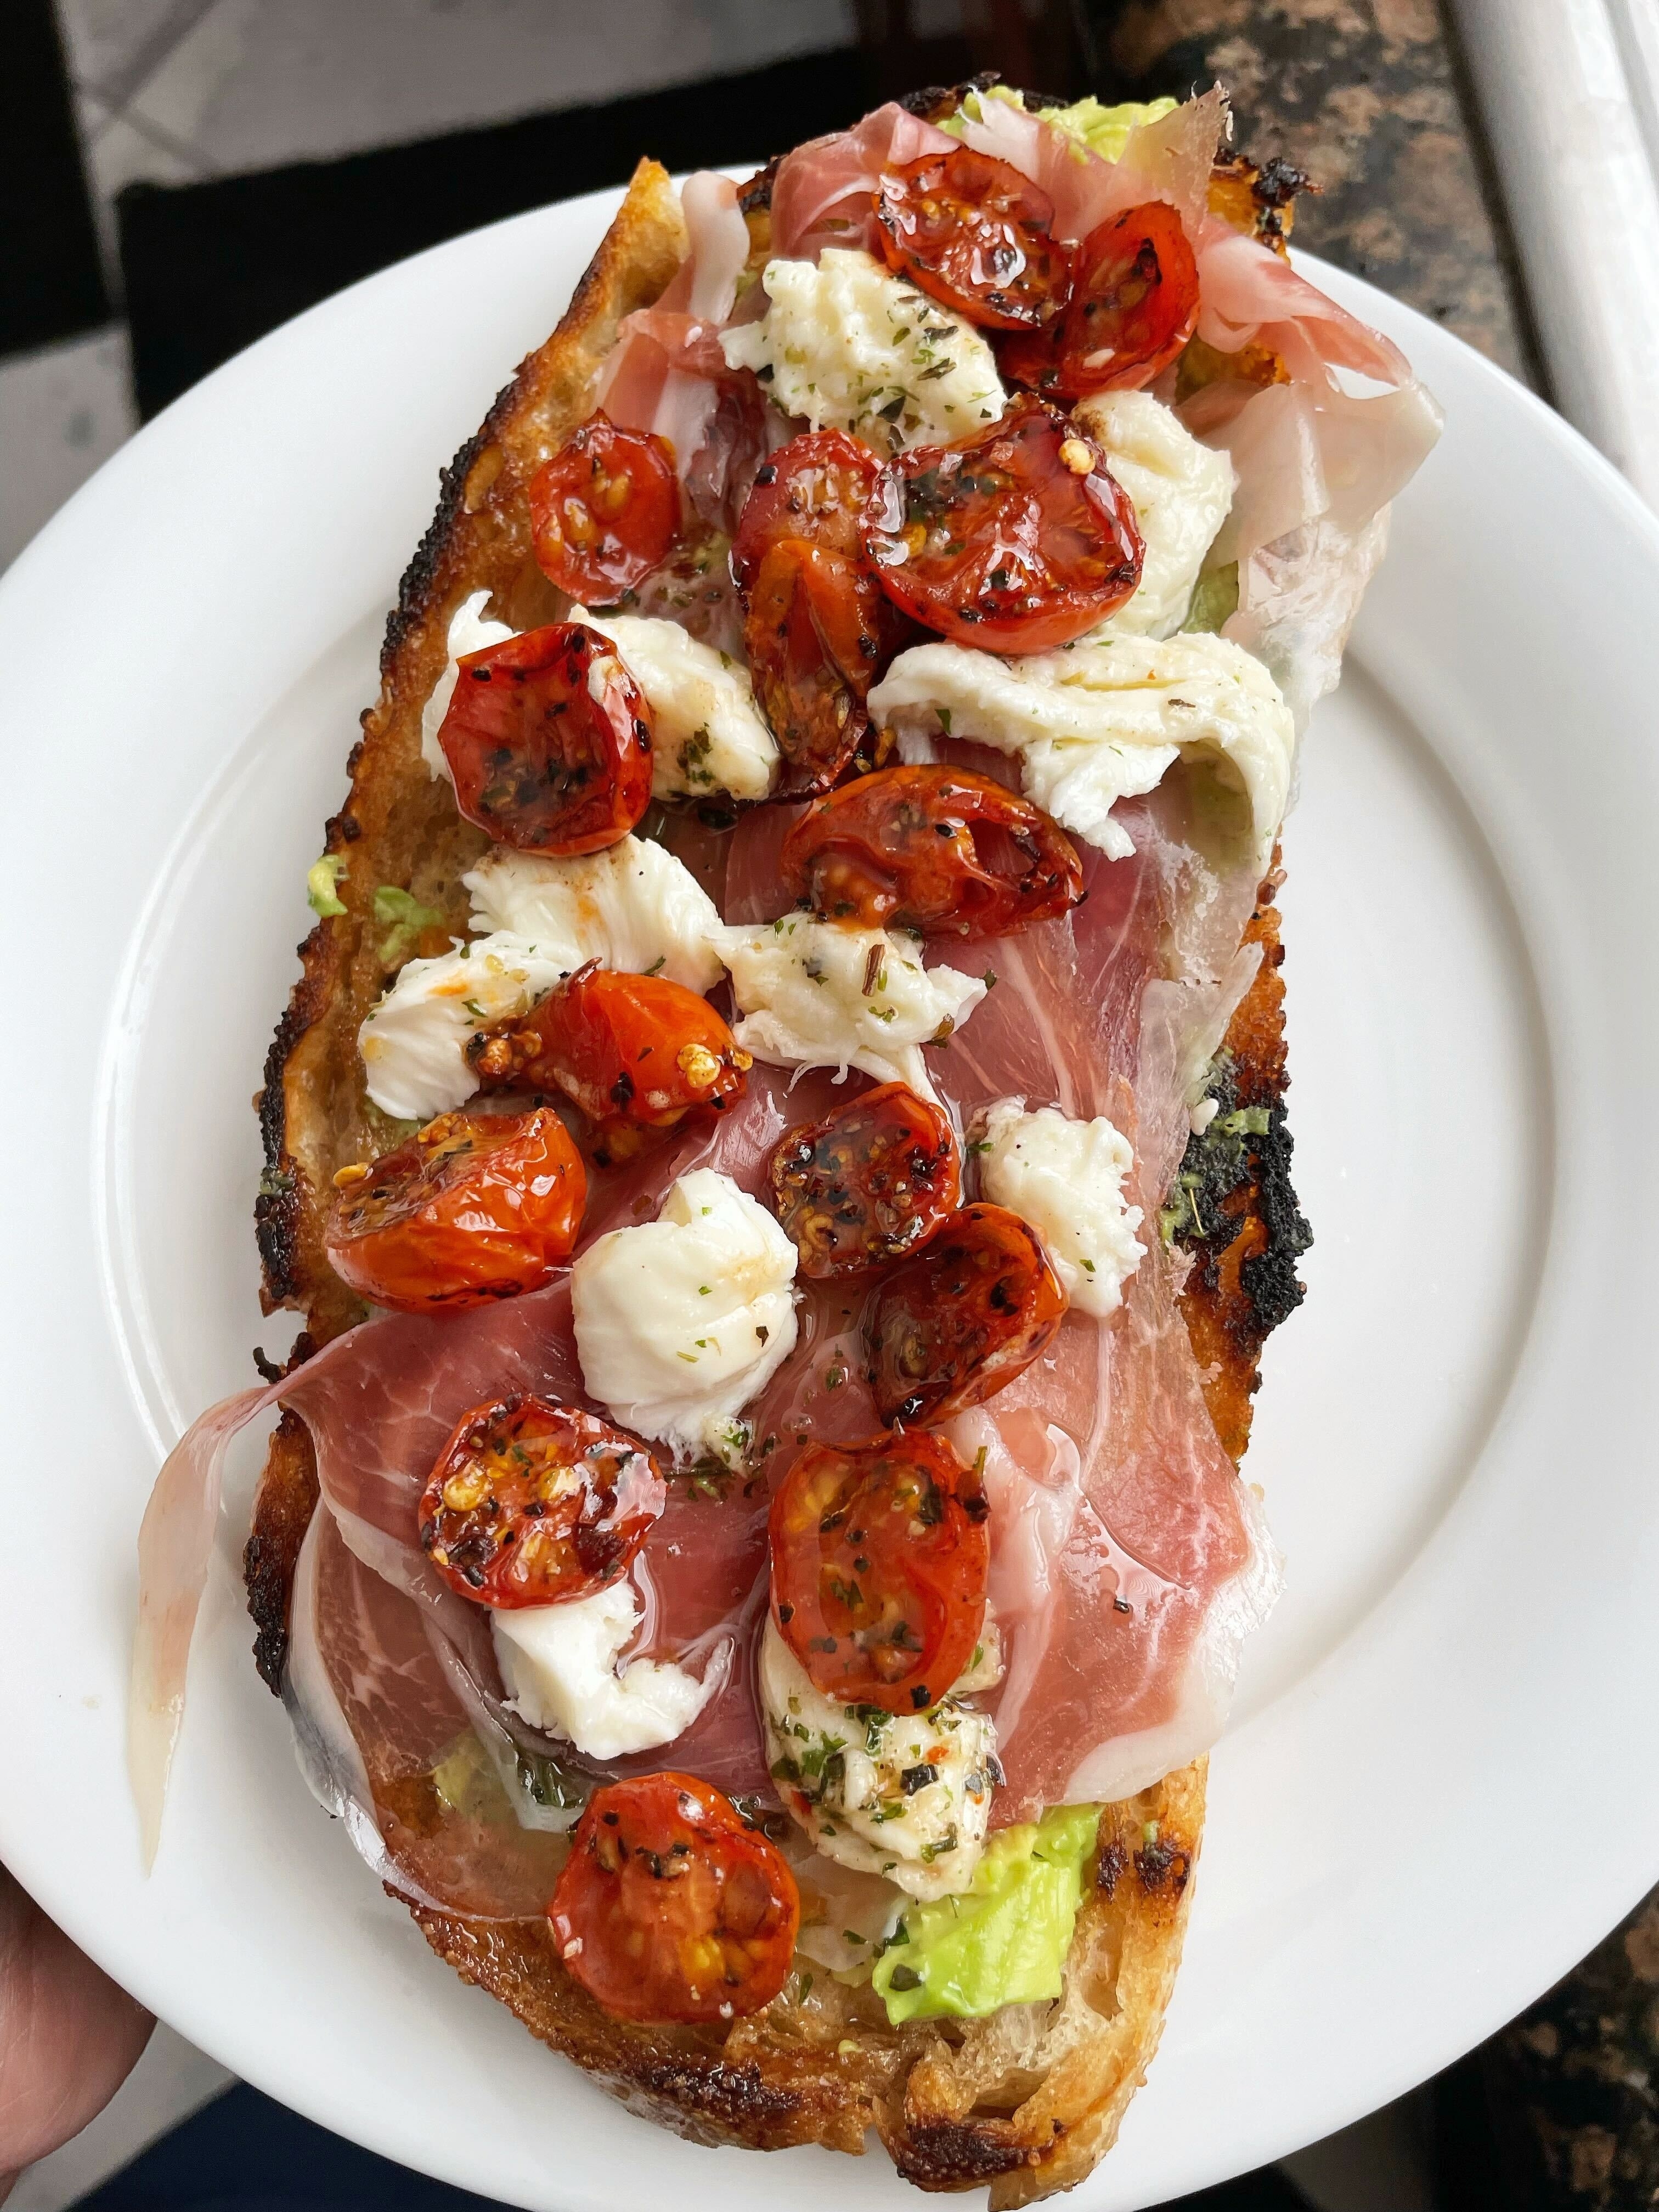 Person holding a plate with bruschetta topped with tomatoes, cheese, and cured meat